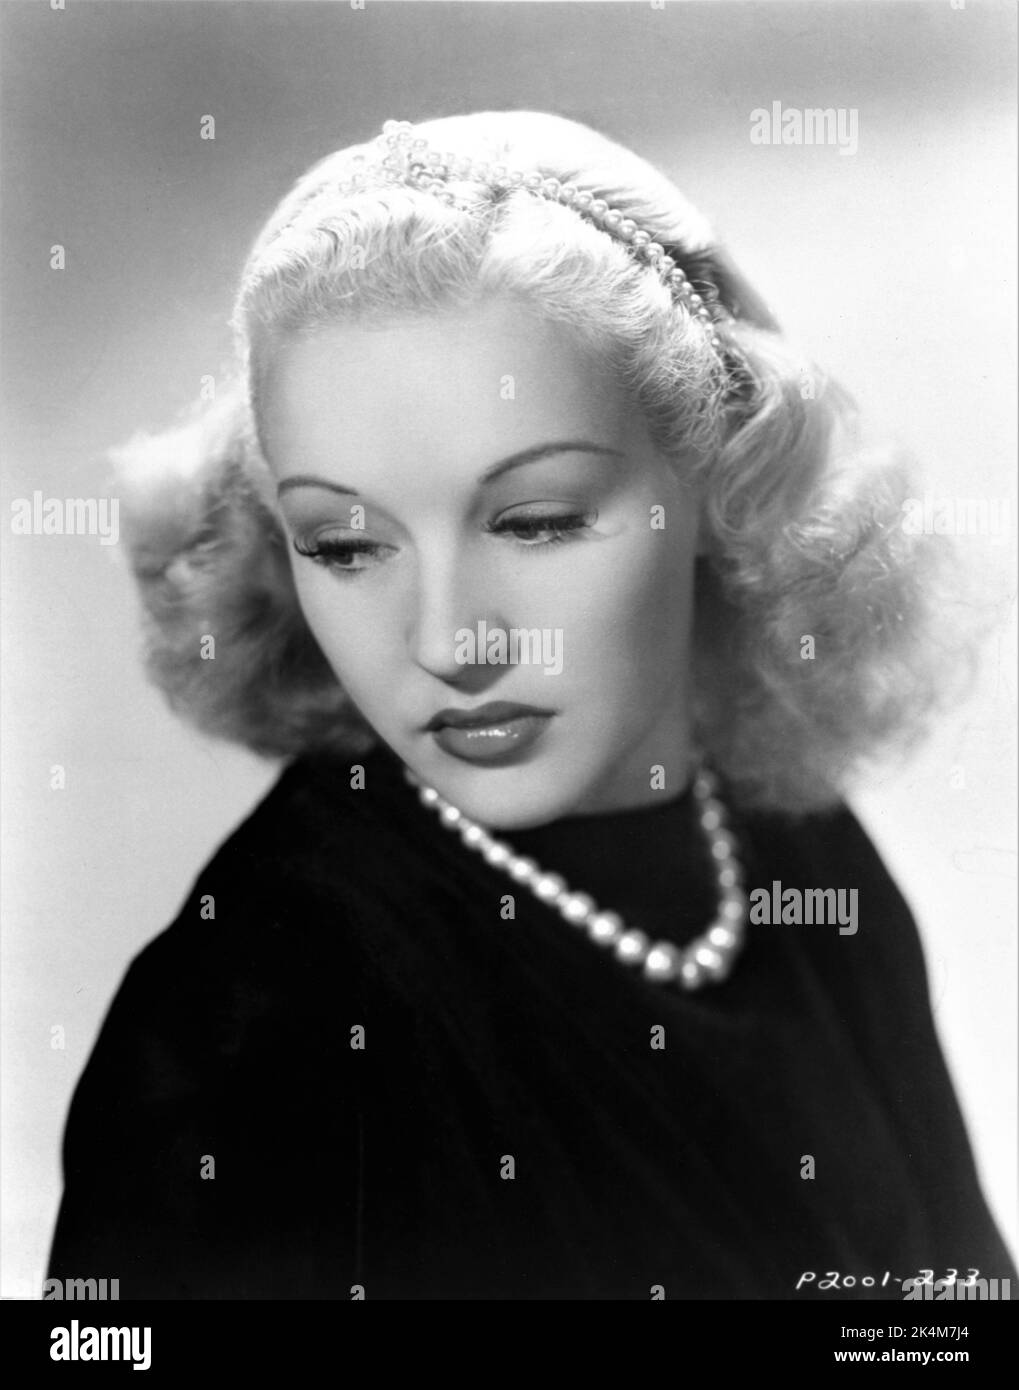 BETTY GRABLE 1938 Portrait publicity for Paramount Pictures Stock Photo